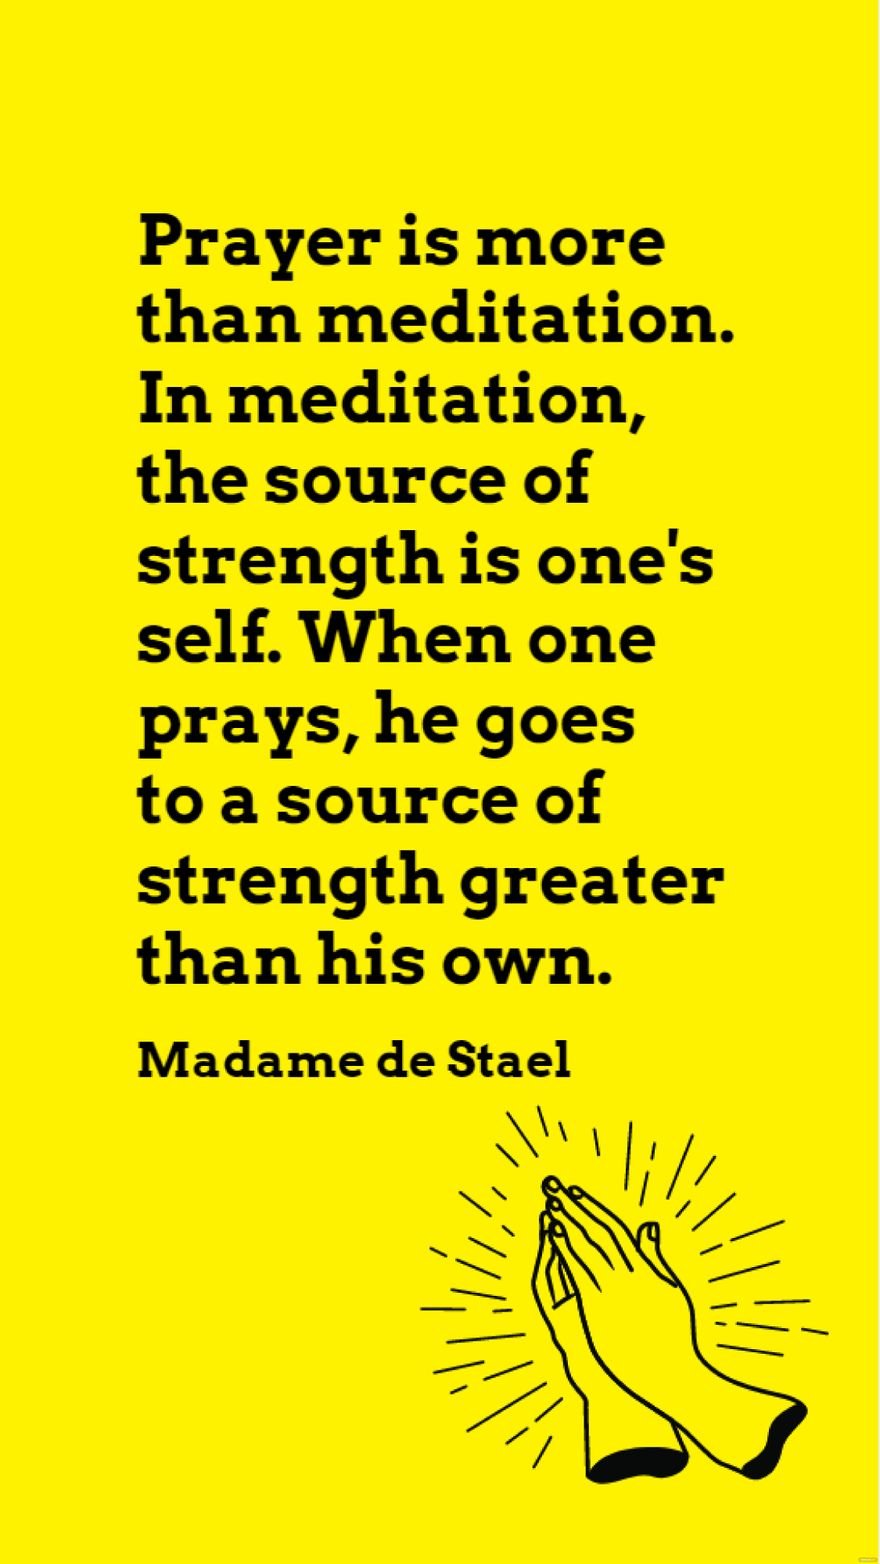 Madame de Stael - Prayer is more than meditation. In meditation, the source of strength is one's self. When one prays, he goes to a source of strength greater than his own.